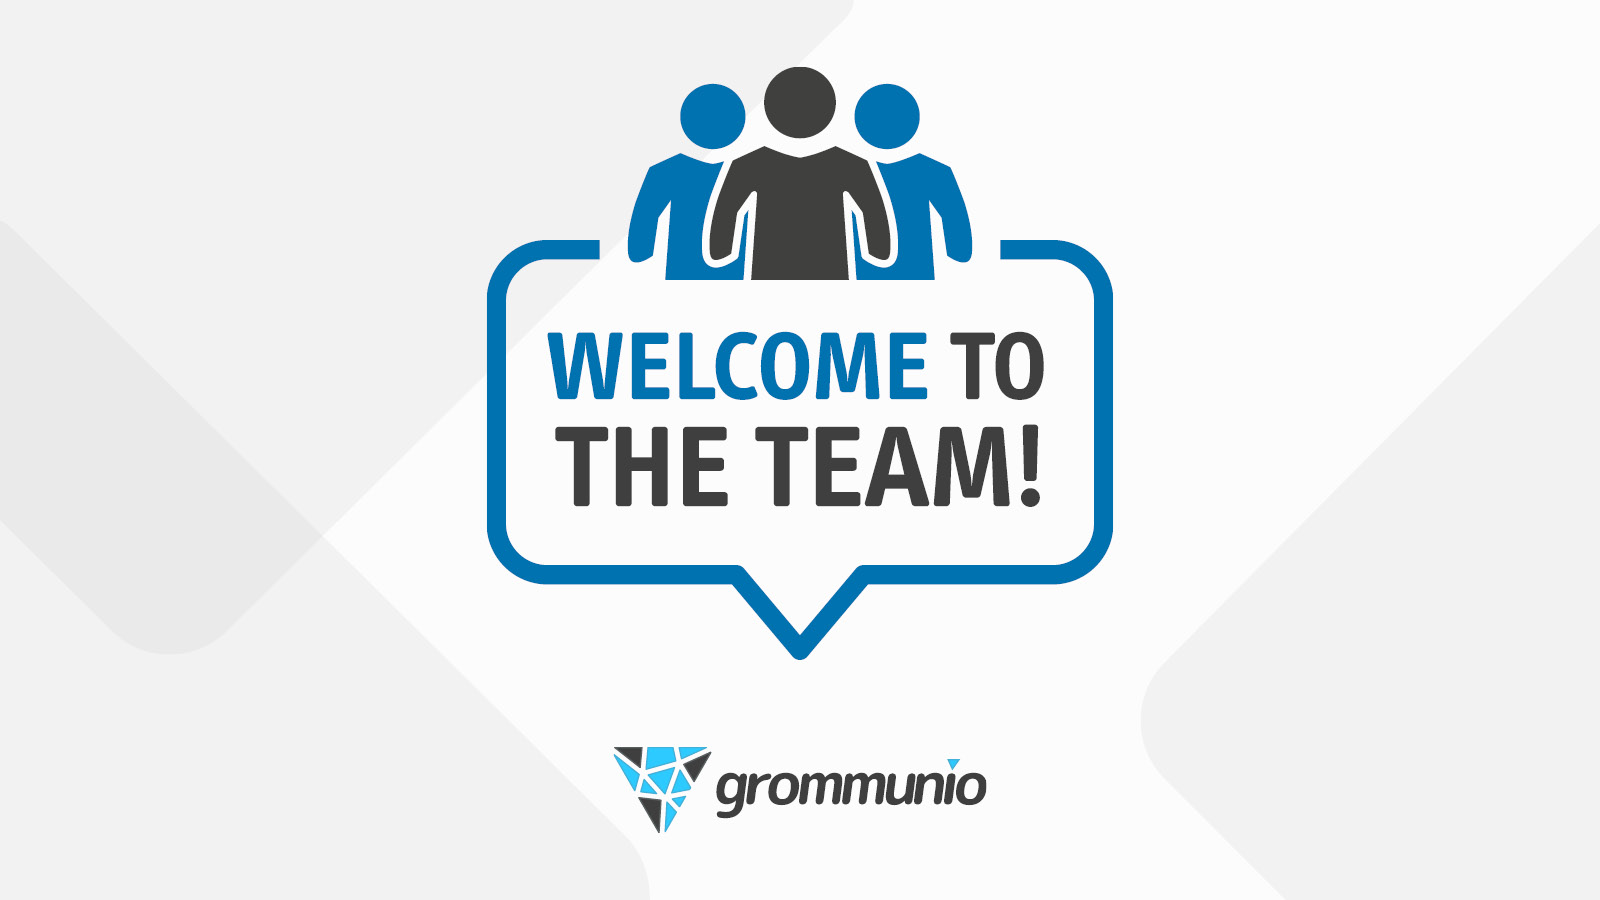 Reinforcement for grommunio: Exchange replacement brings in another PR and Linux expert